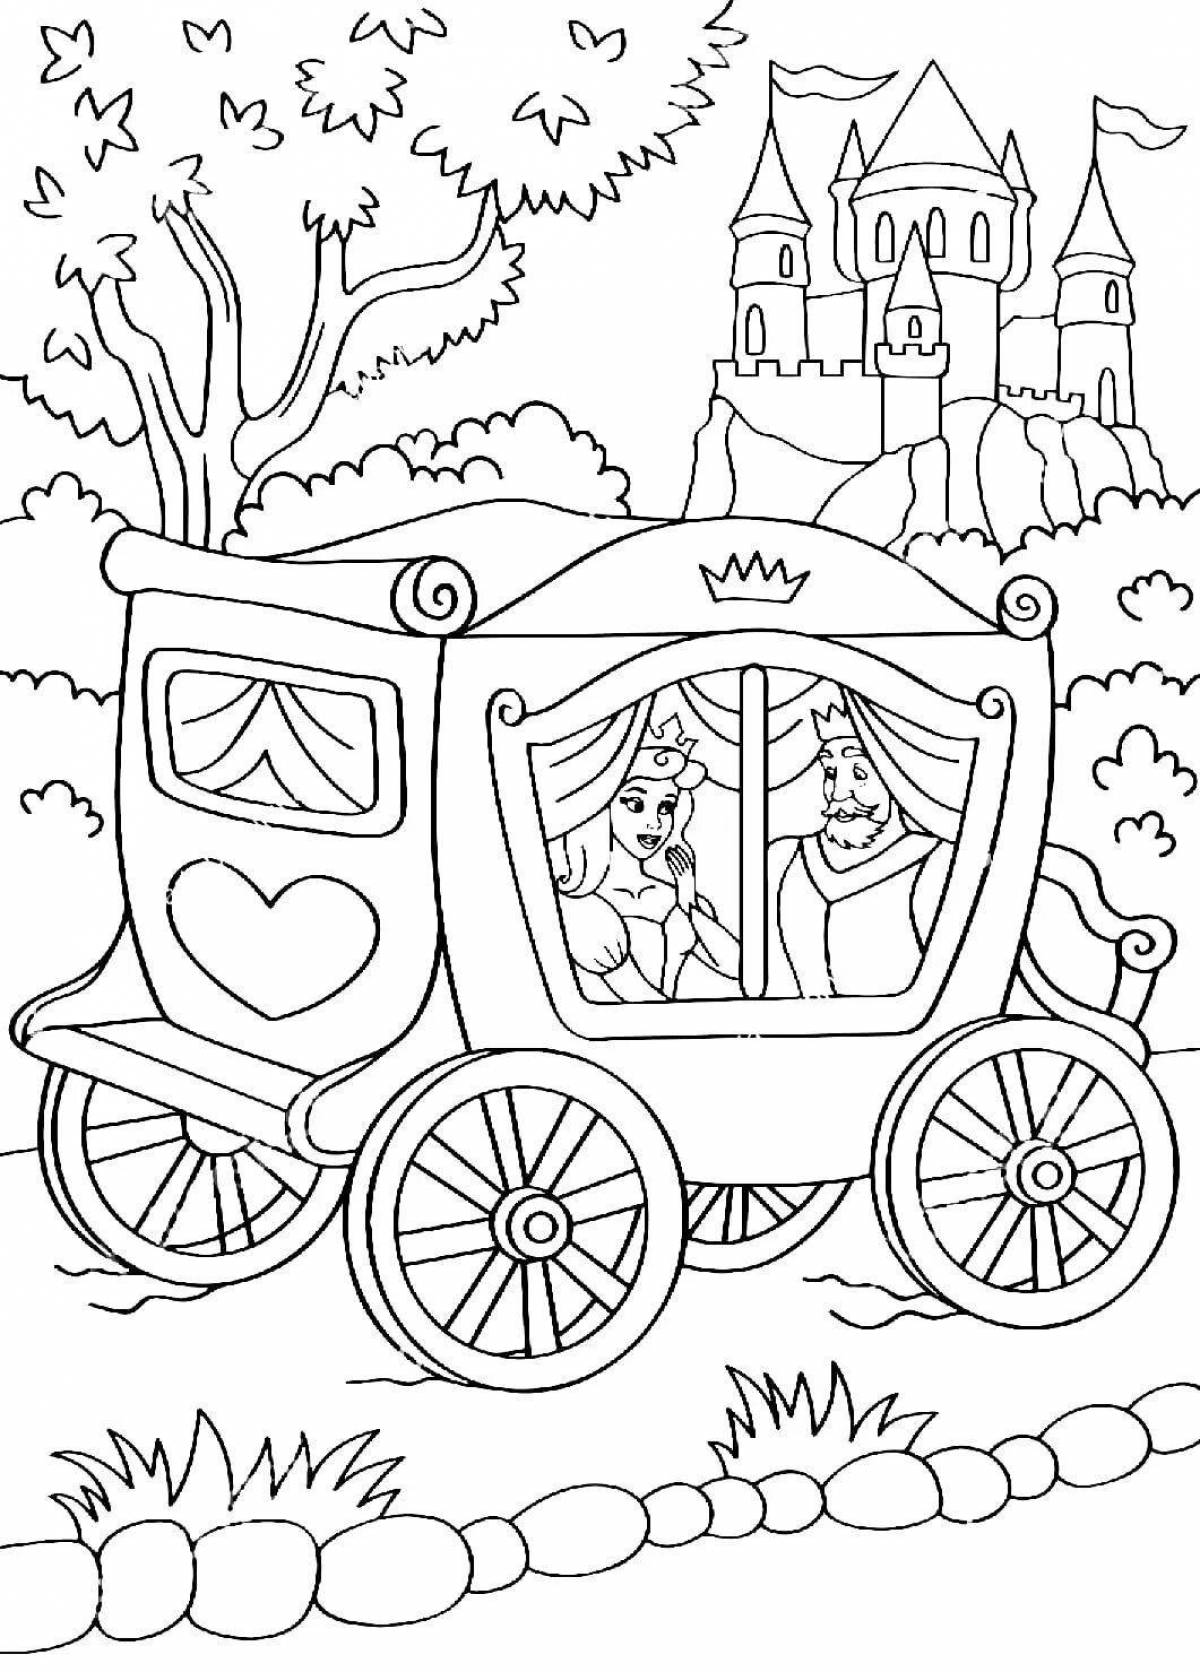 Amazing princess in a carriage coloring book